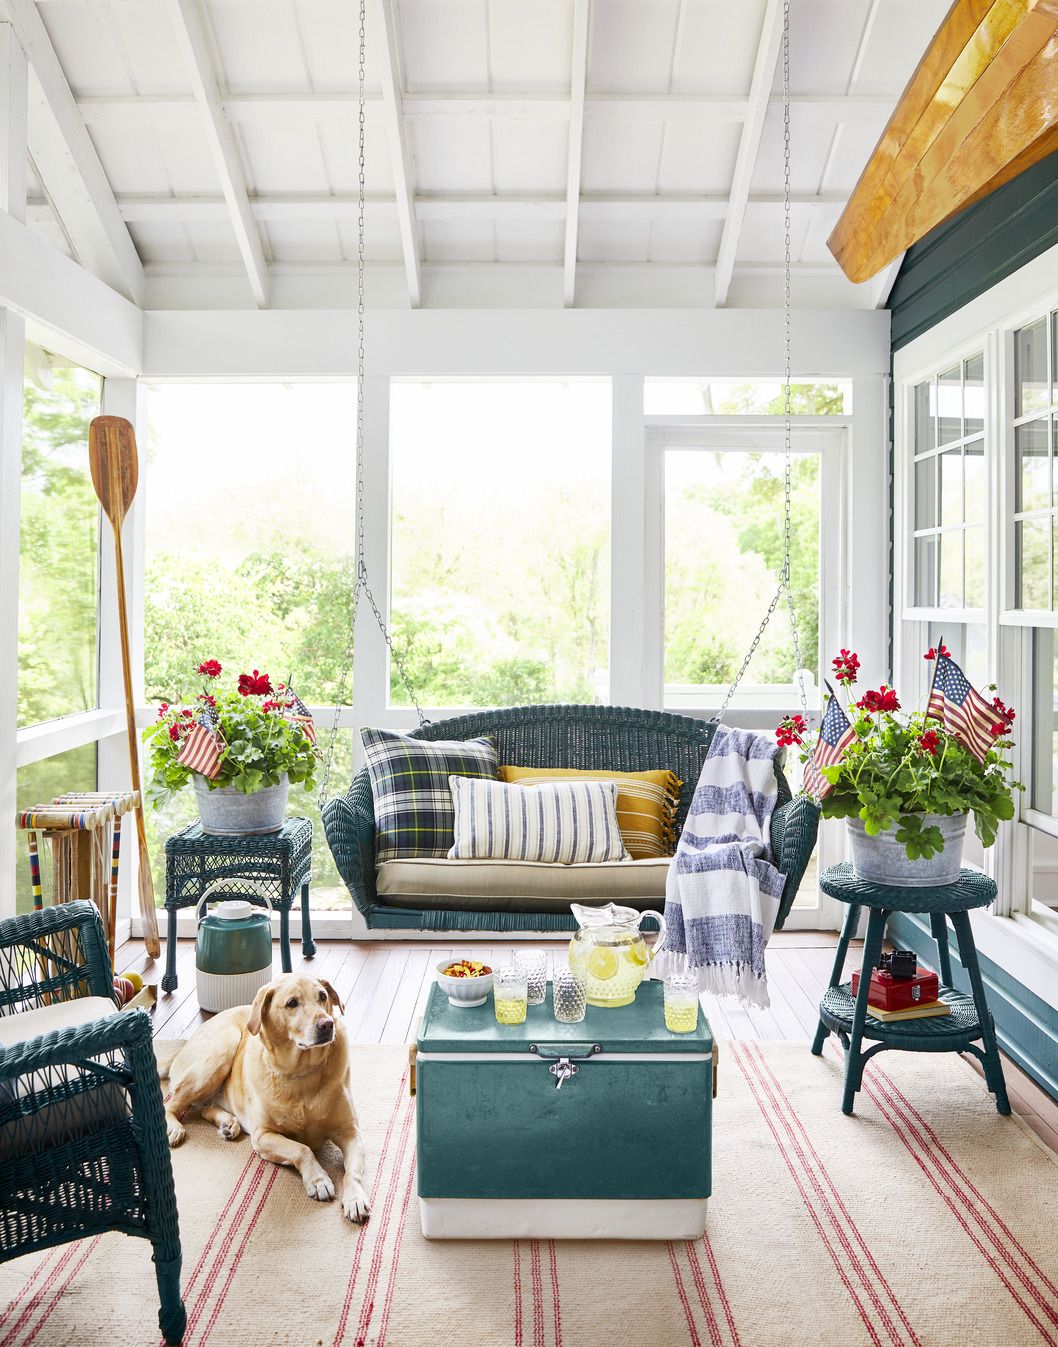 This Cozy Georgia Lake Cabin Is Full of Colorful Vintage Finds